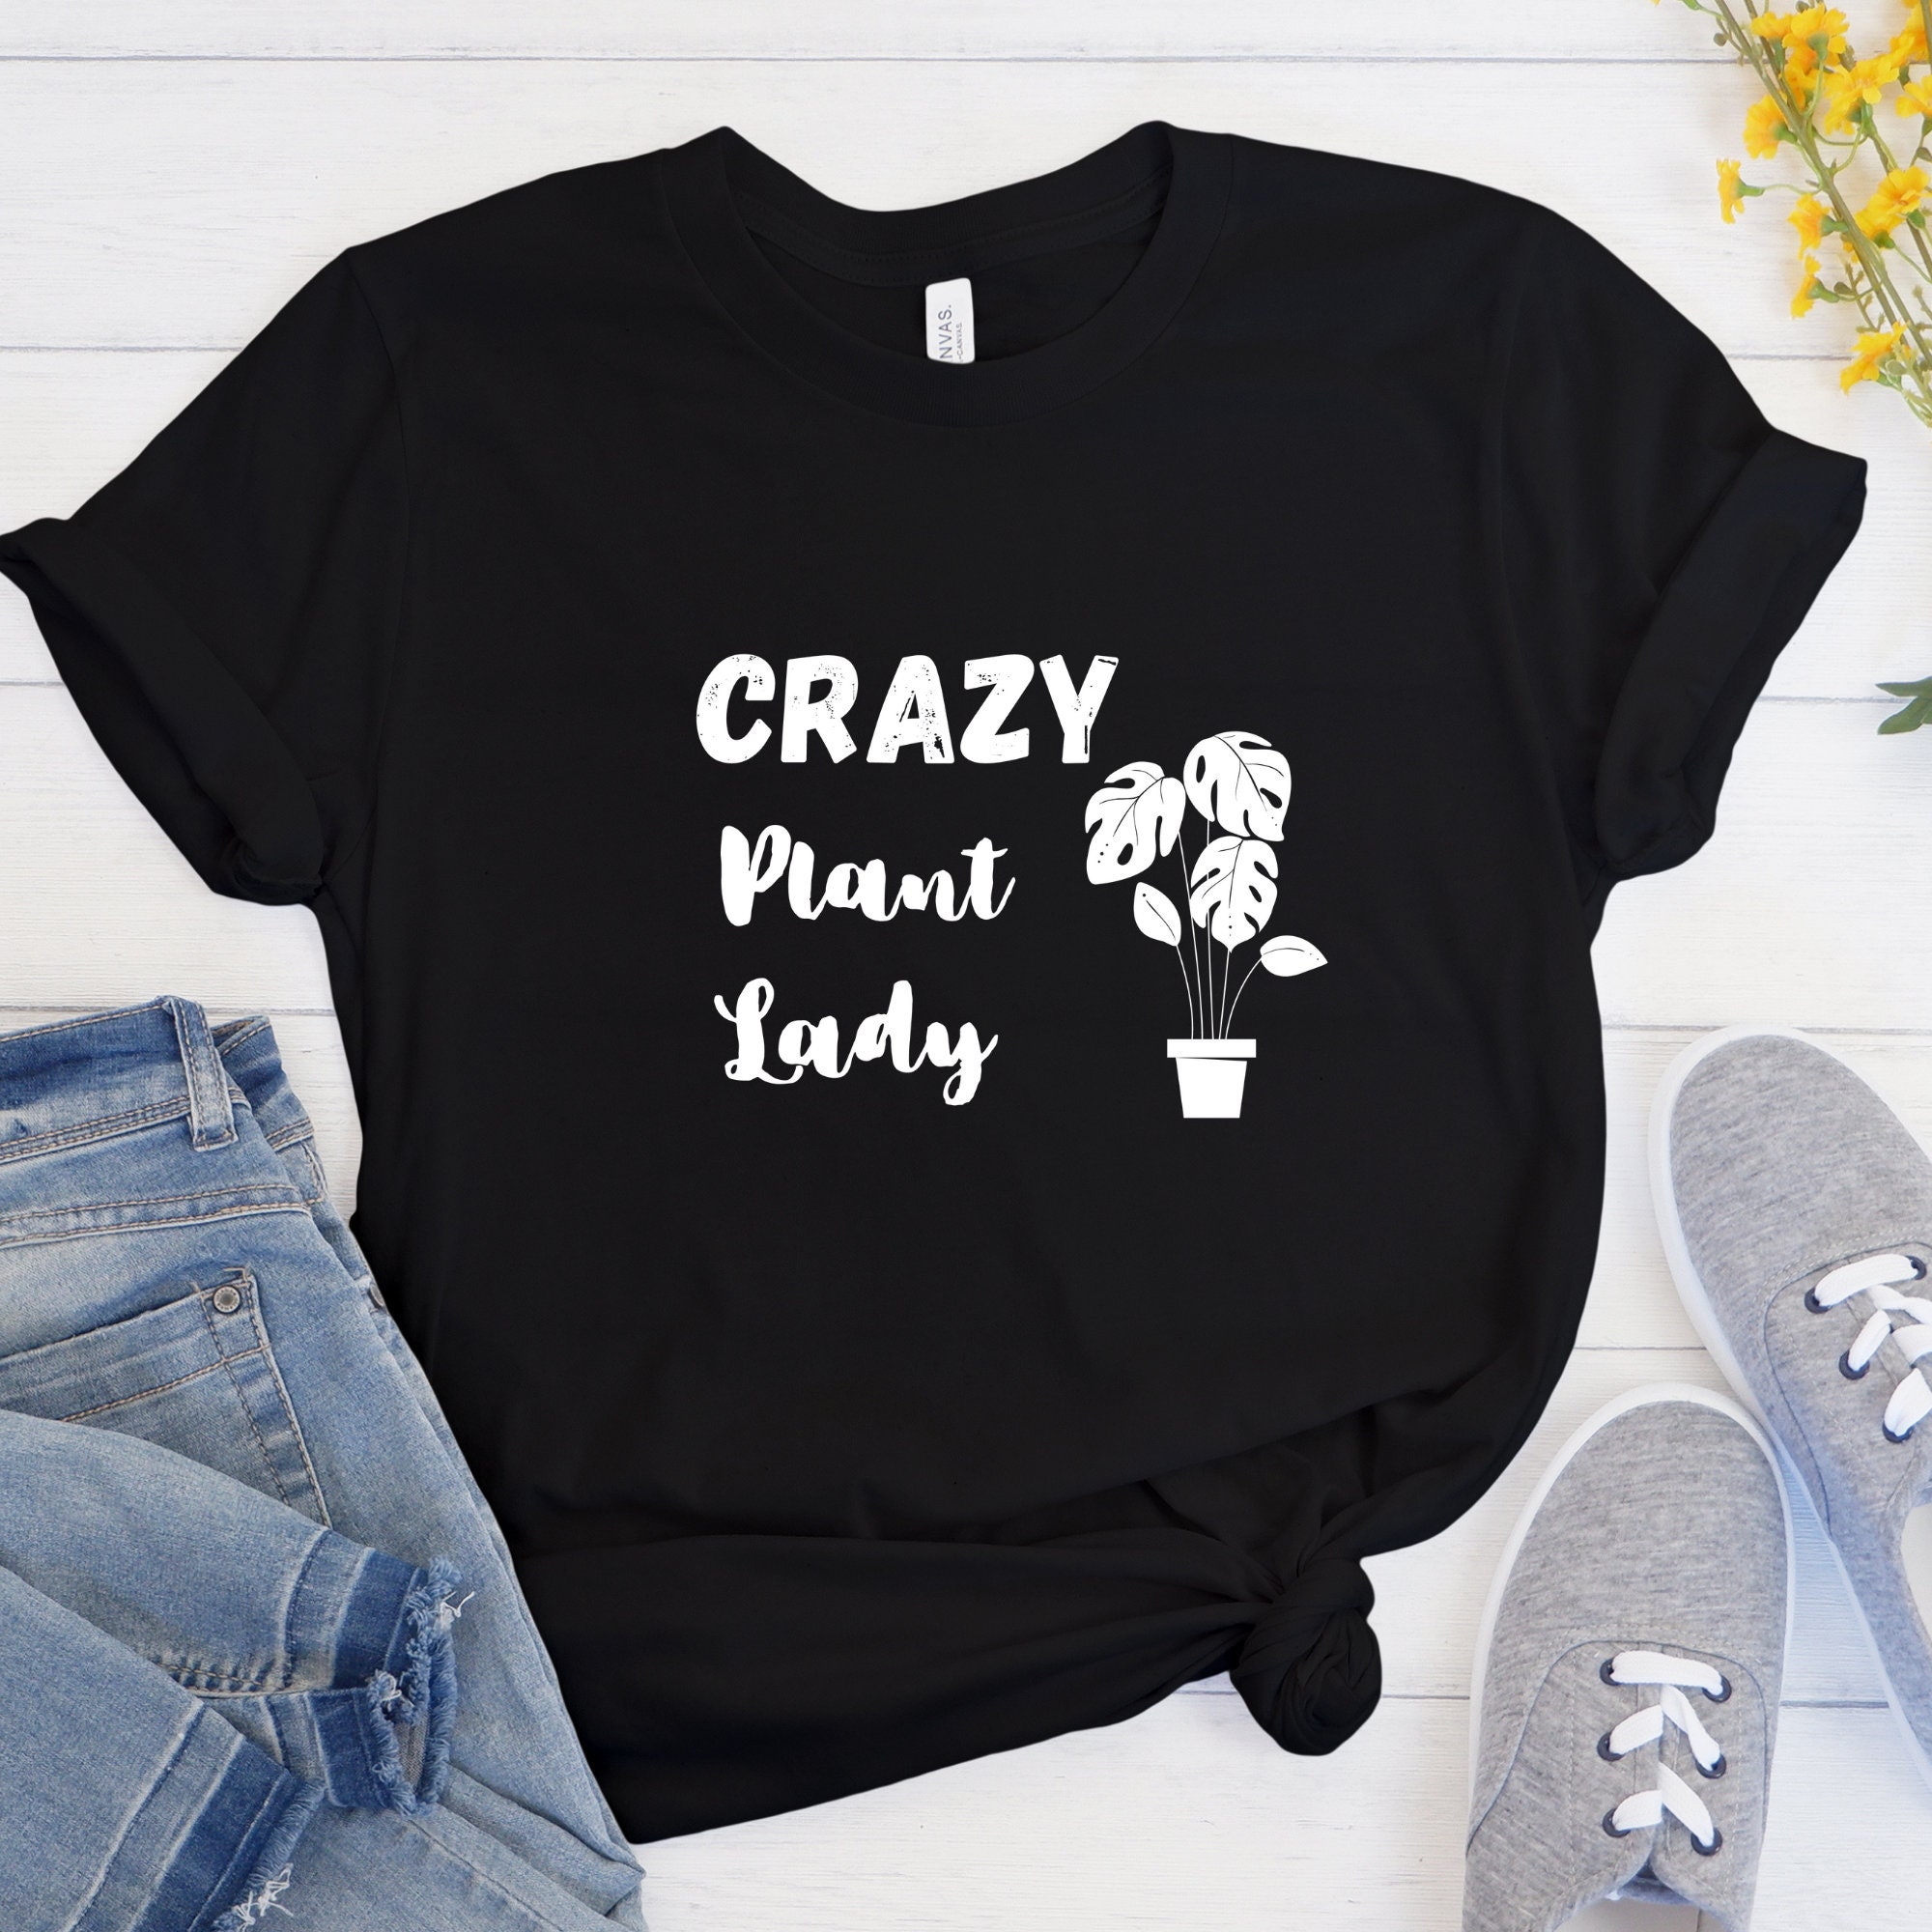 Green Thumb Gift for Mom Mother's day gift garden Plant Lover T-Shirt Crazy Plant Lady T-shirt Gardener Bella Canvas Botanical